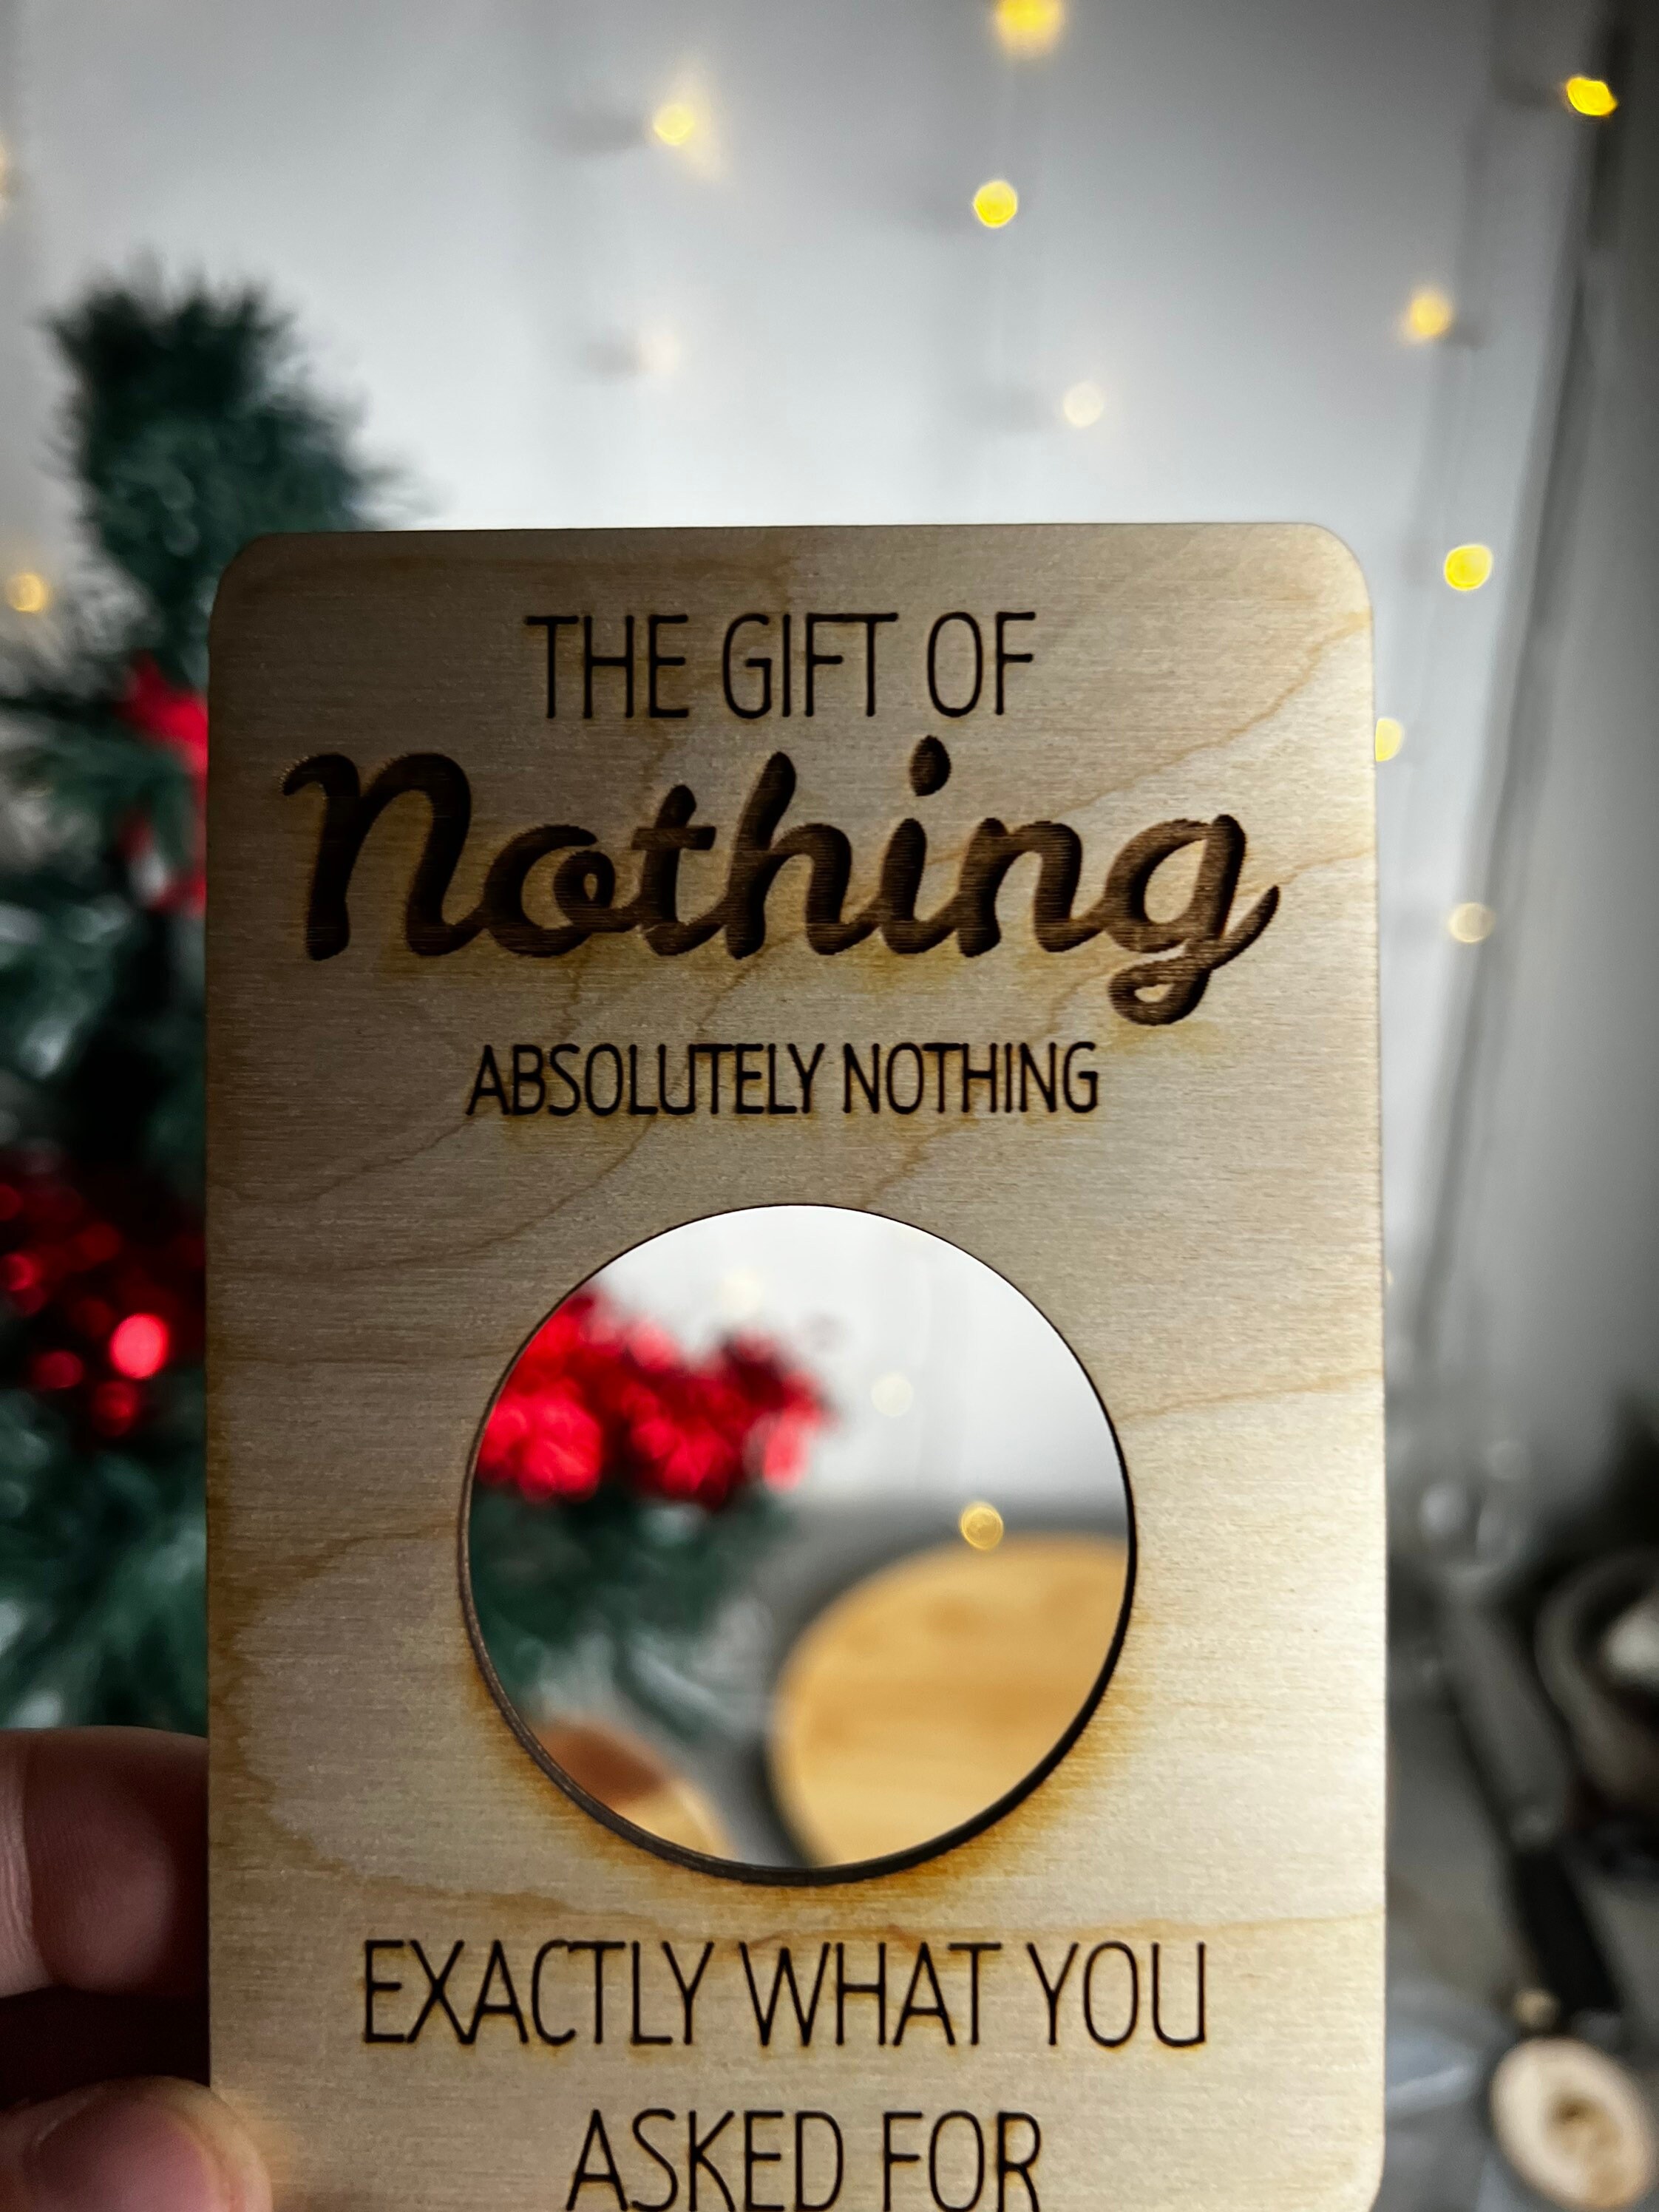 The Gift Of Nothing Is Perfect For Those Who Say They Want Nothing